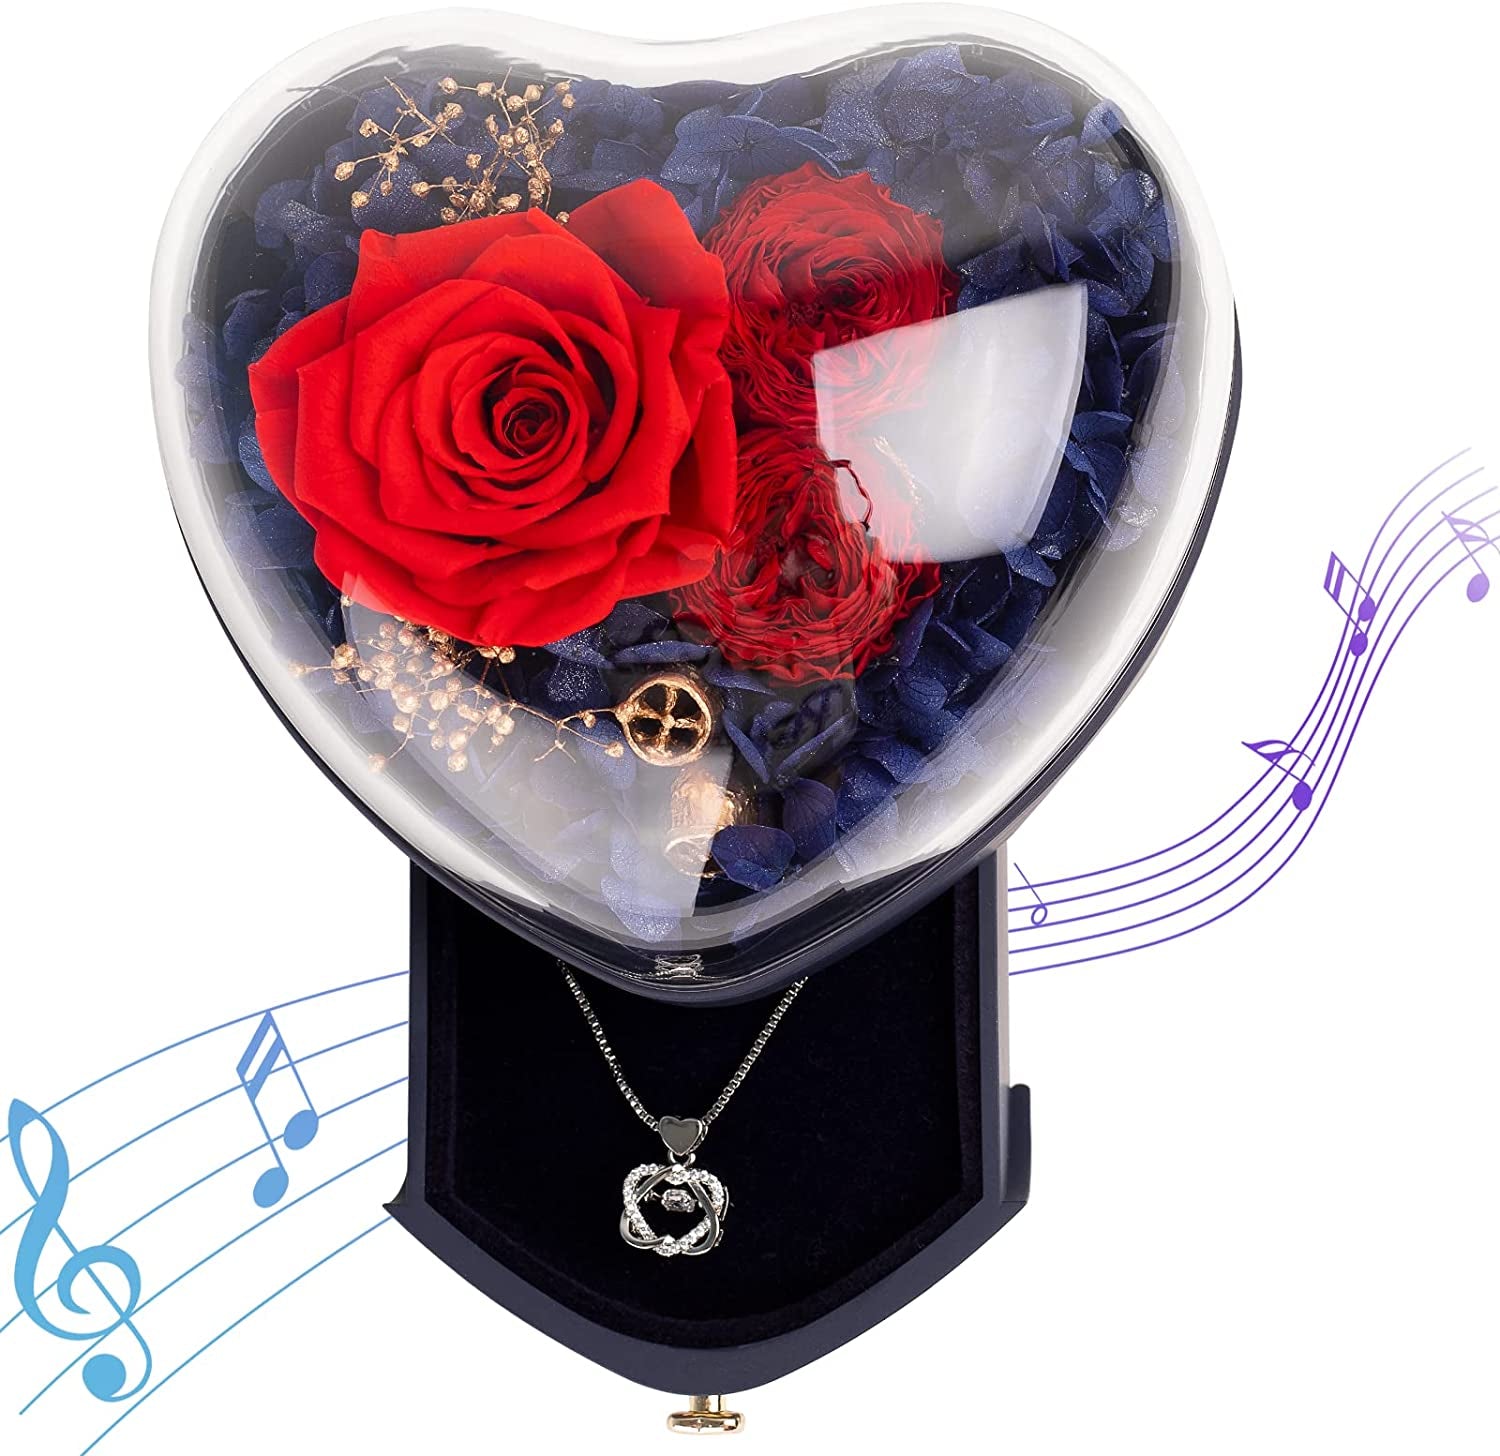 Preserved Rose and Necklace in Music Box, Rose Box with Jewelry. Christmas Gifts for Women, Unique Christmas Gifts Ideas for Wife Mom Grandma Daughter Sister Family Friends